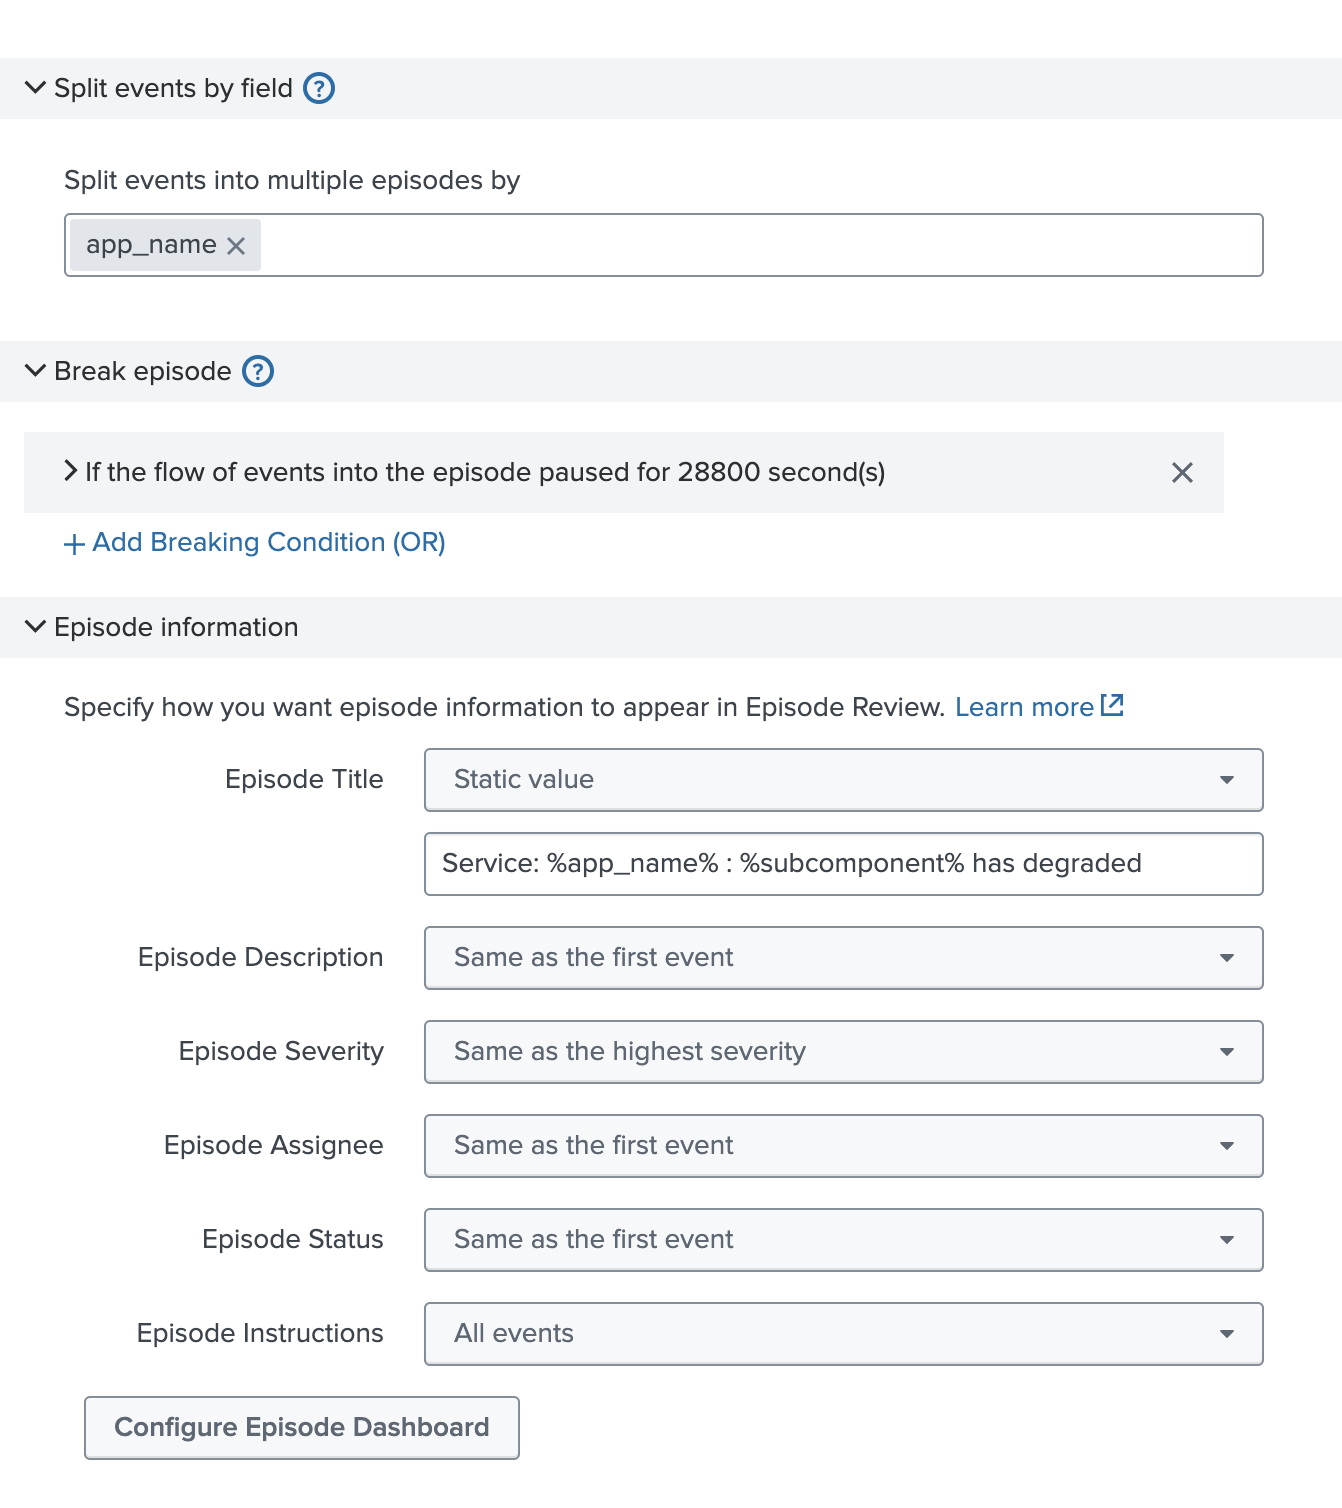 Split events by field, break episode and episode information. Configuring episode dashboard by episode title, description, severity, assignee, status and instructions. 